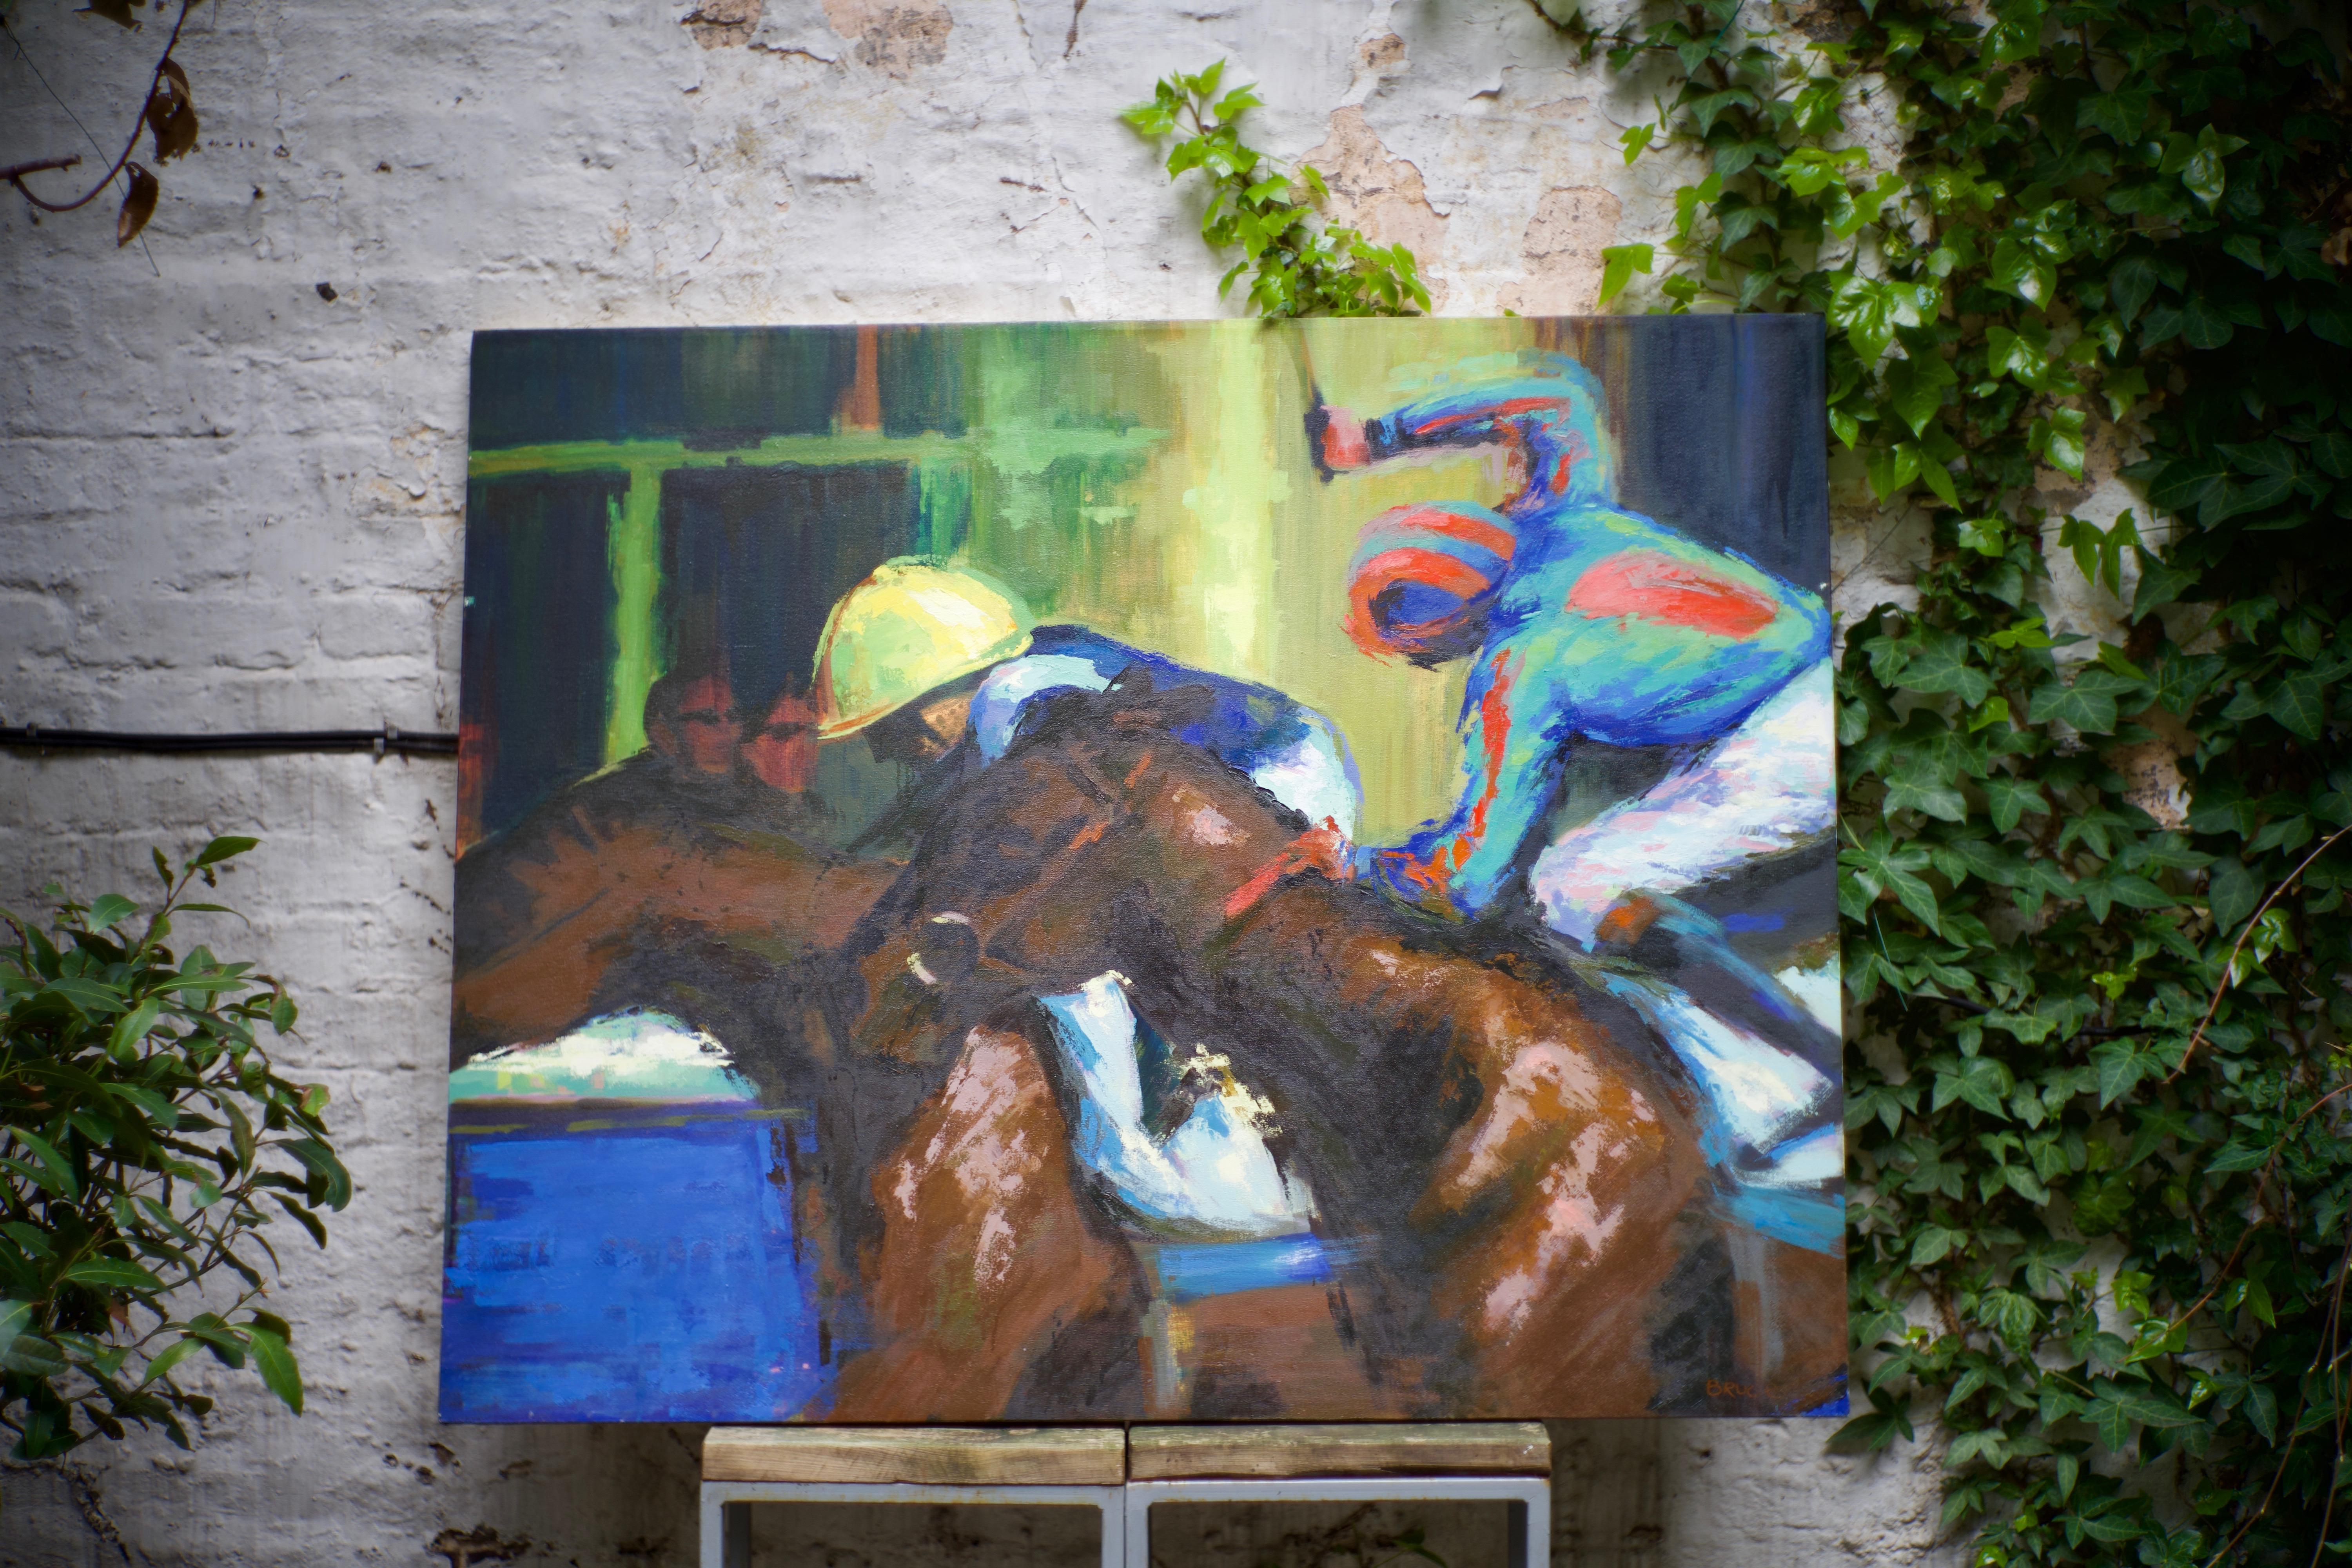 In the Final Strides - Equestrian, Racing, Realist, Contemporary - Painting by Chris Bruce